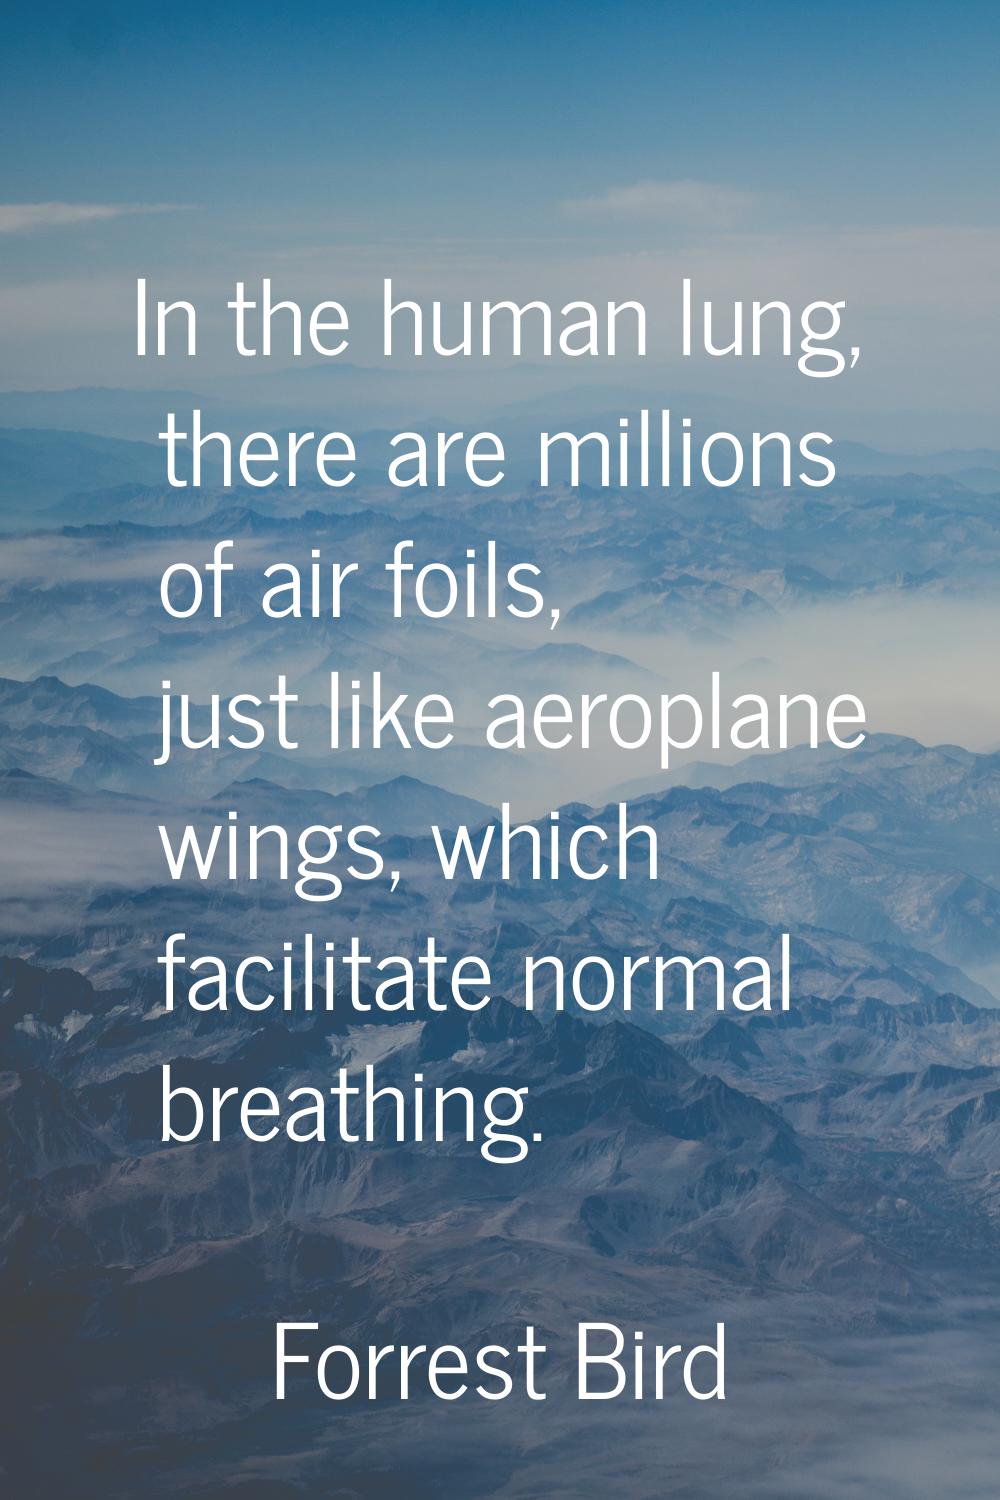 In the human lung, there are millions of air foils, just like aeroplane wings, which facilitate nor